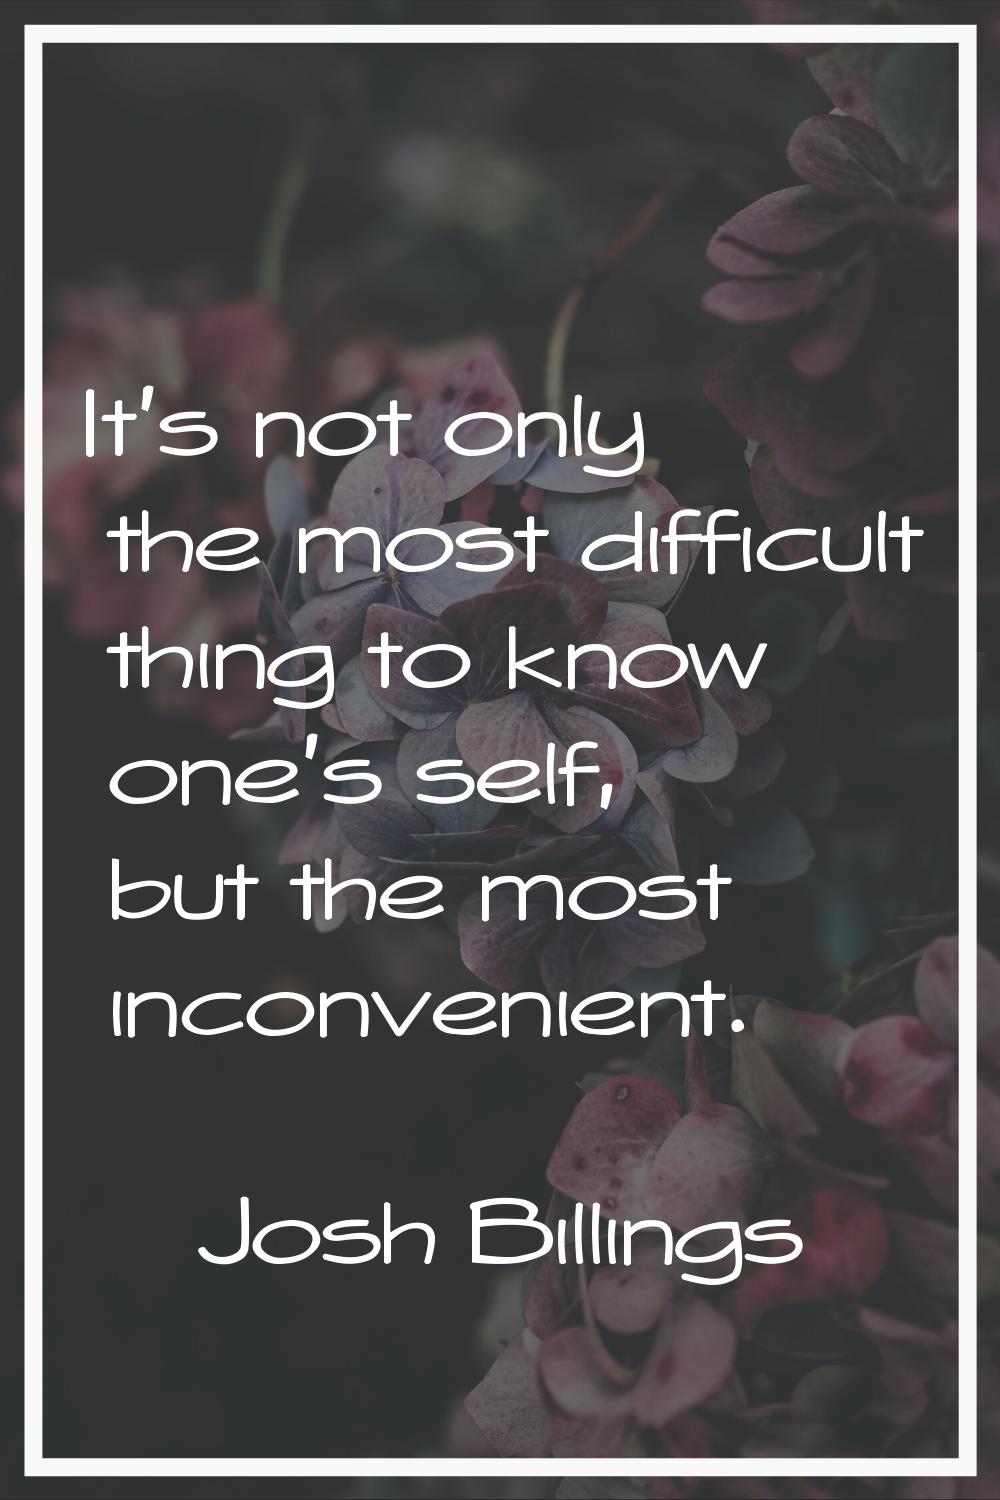 It's not only the most difficult thing to know one's self, but the most inconvenient.